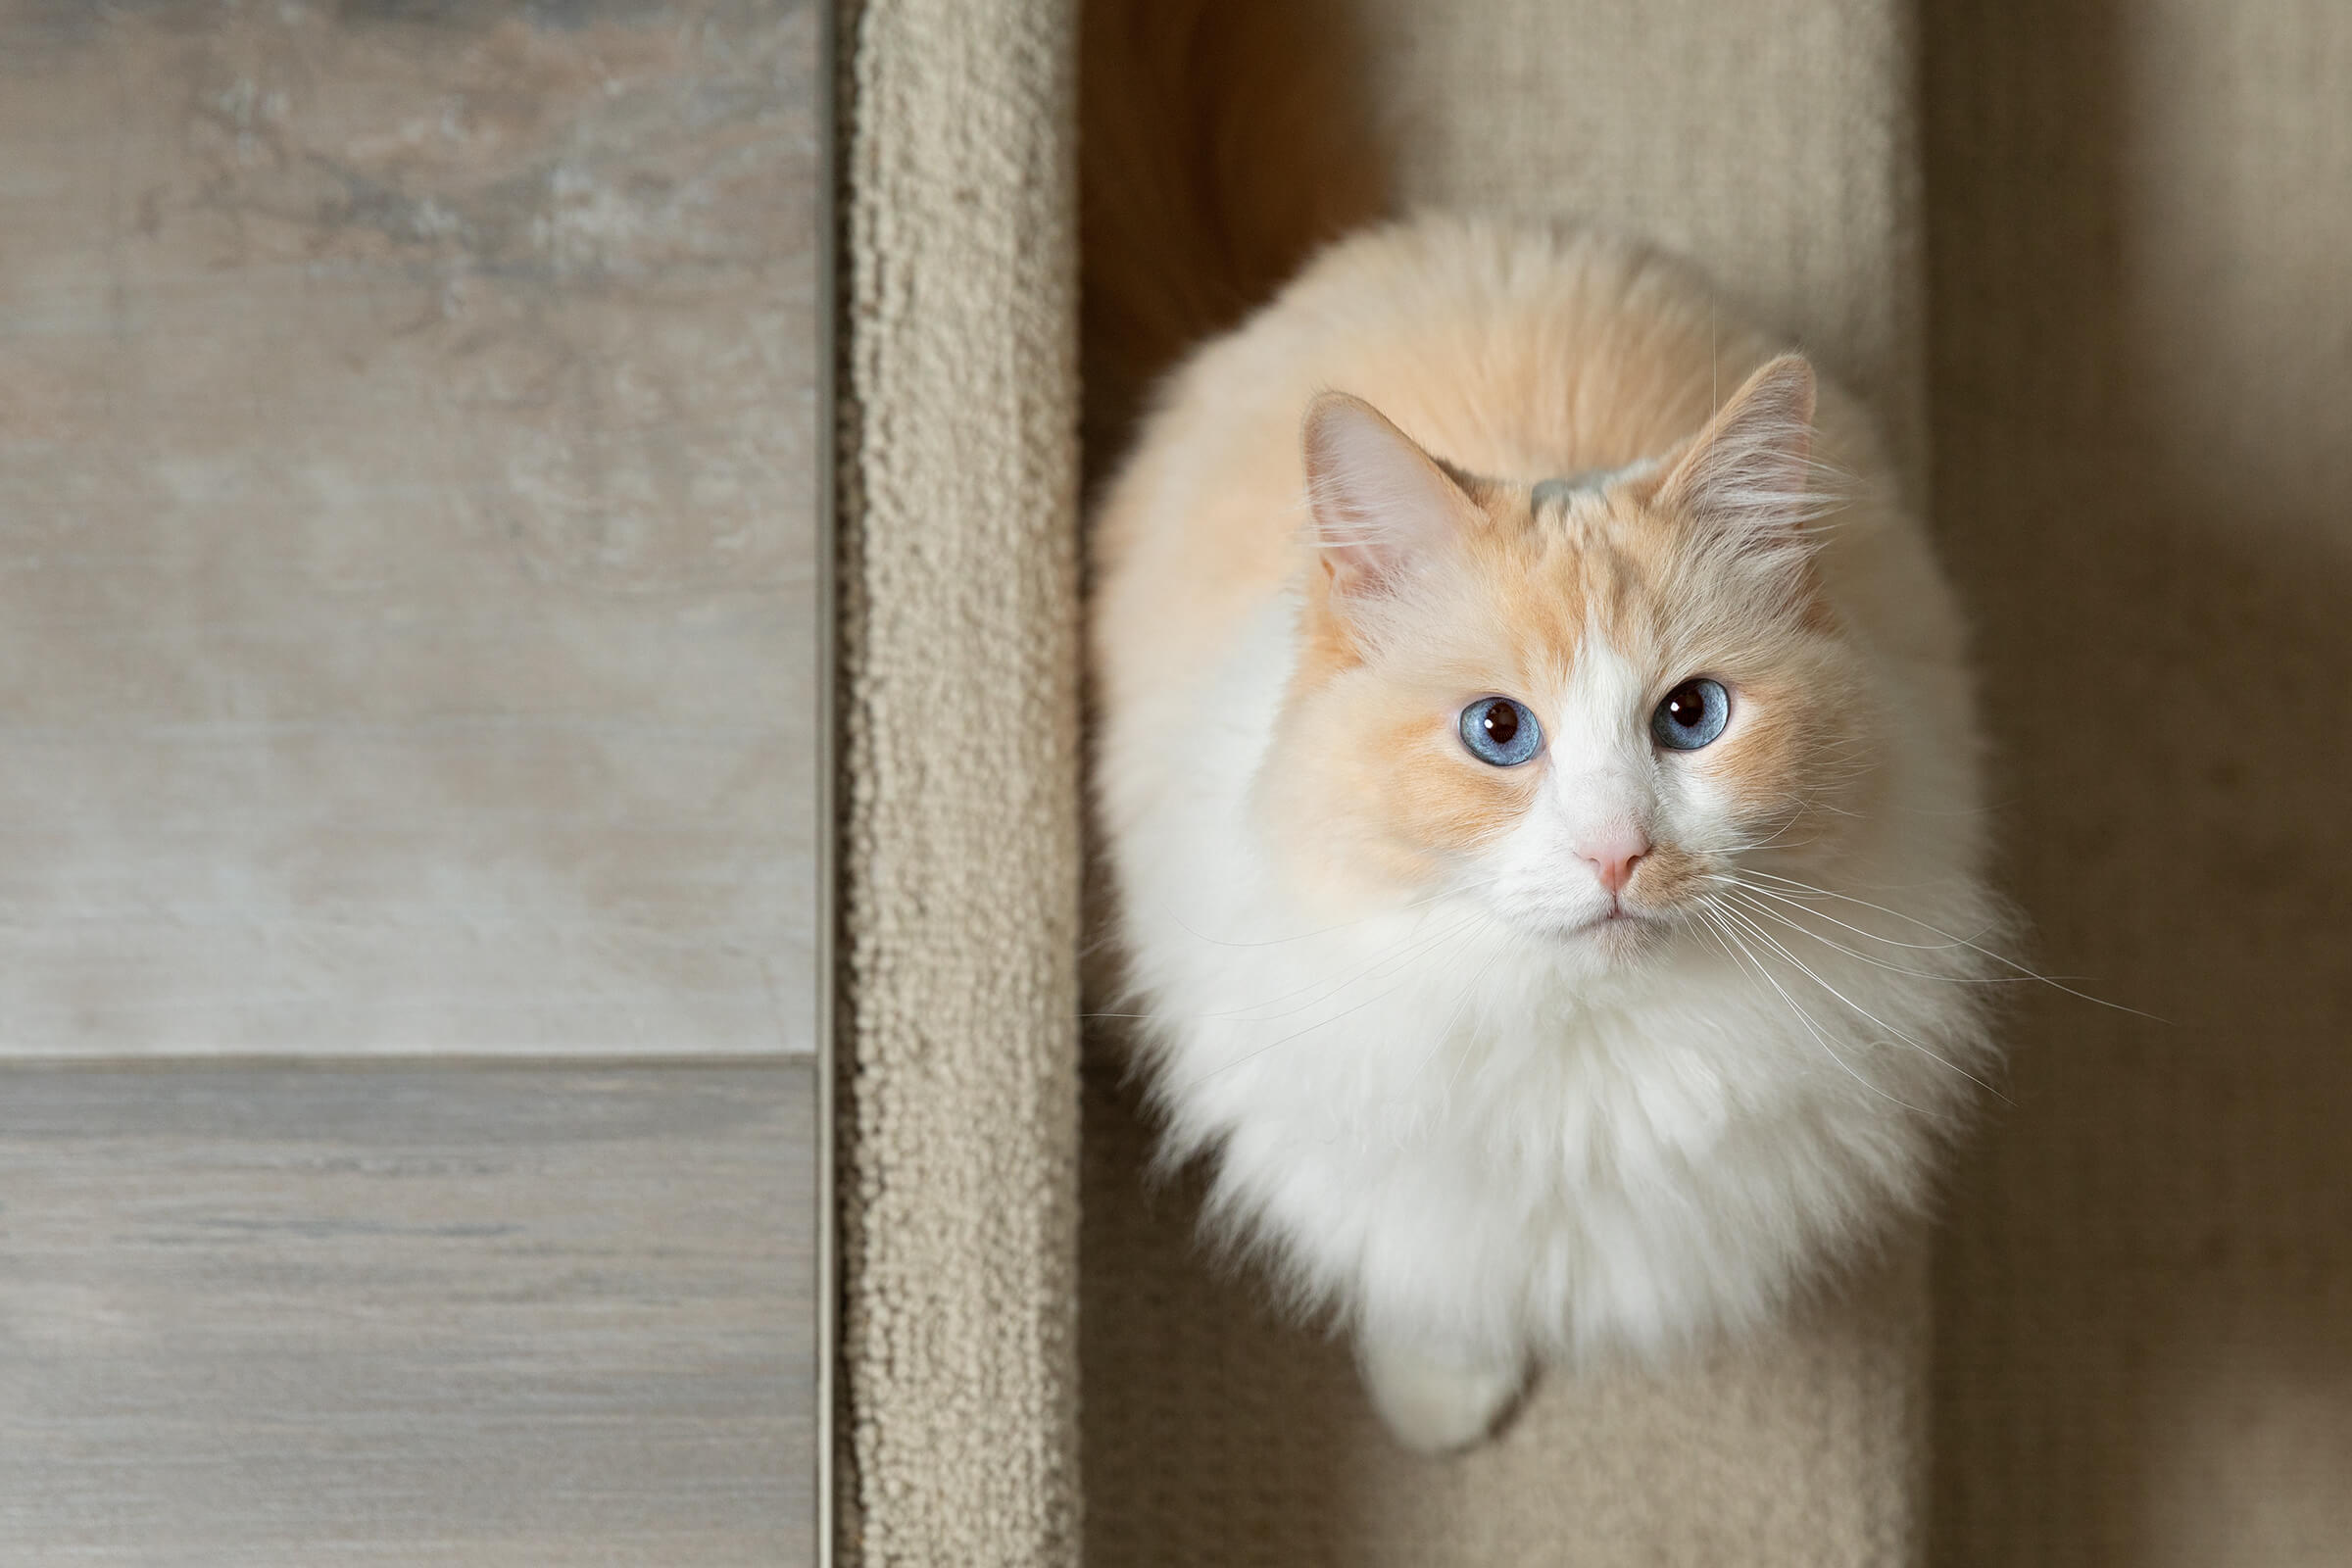 ragdoll cat on stairs looking up at photographer